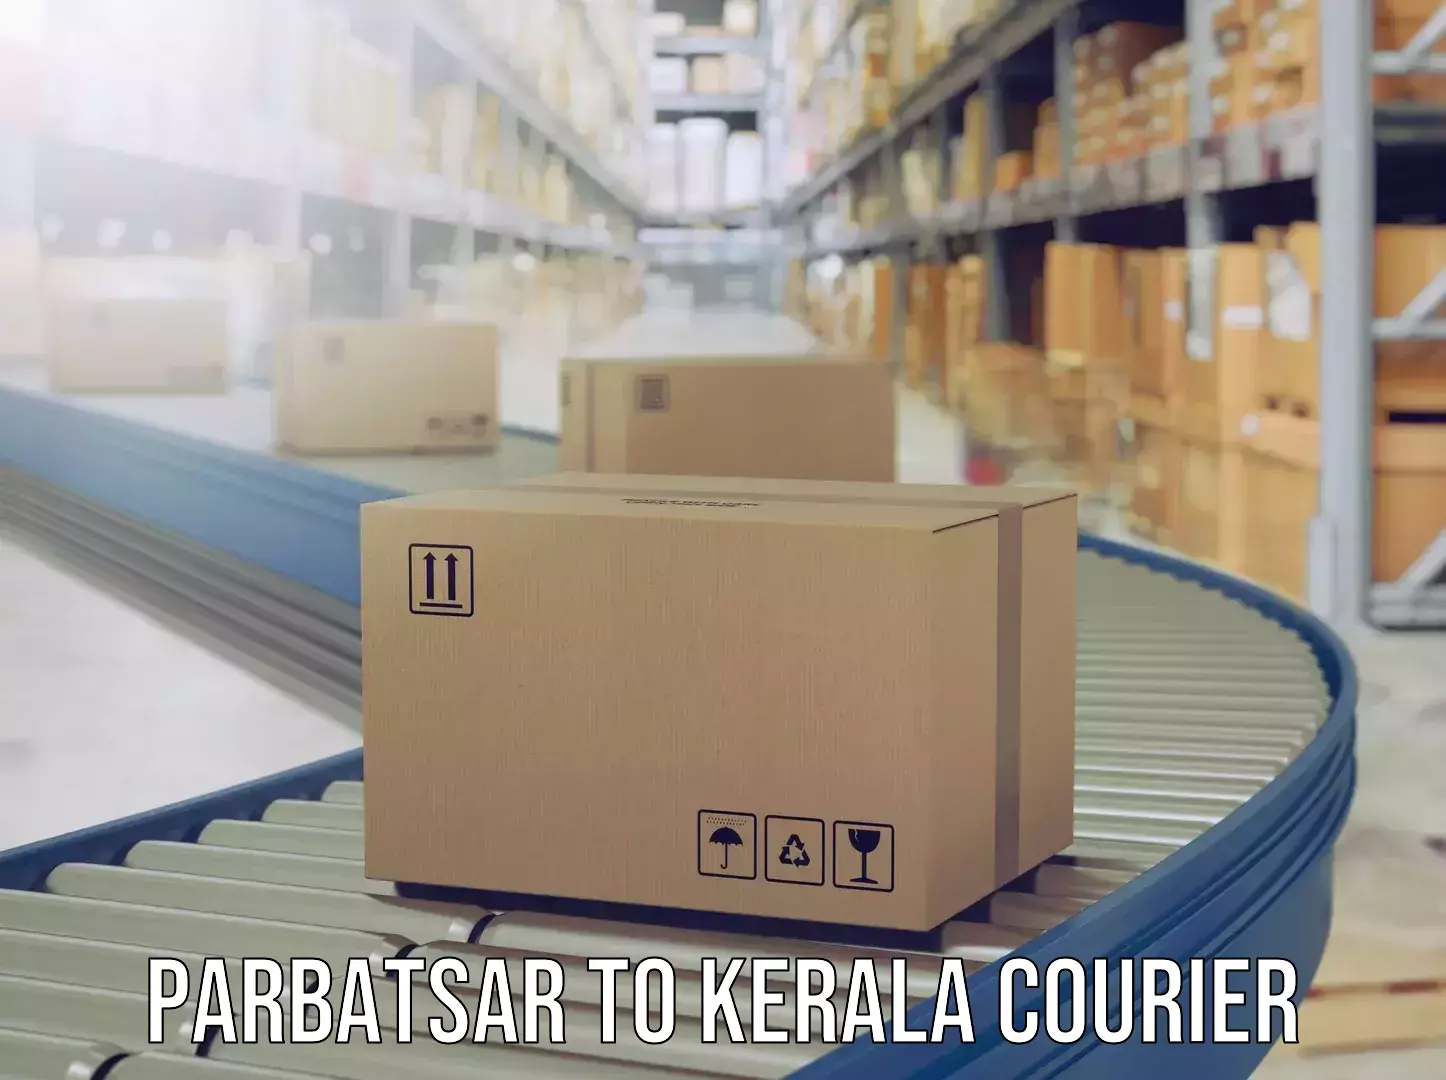 Express luggage delivery Parbatsar to Kerala